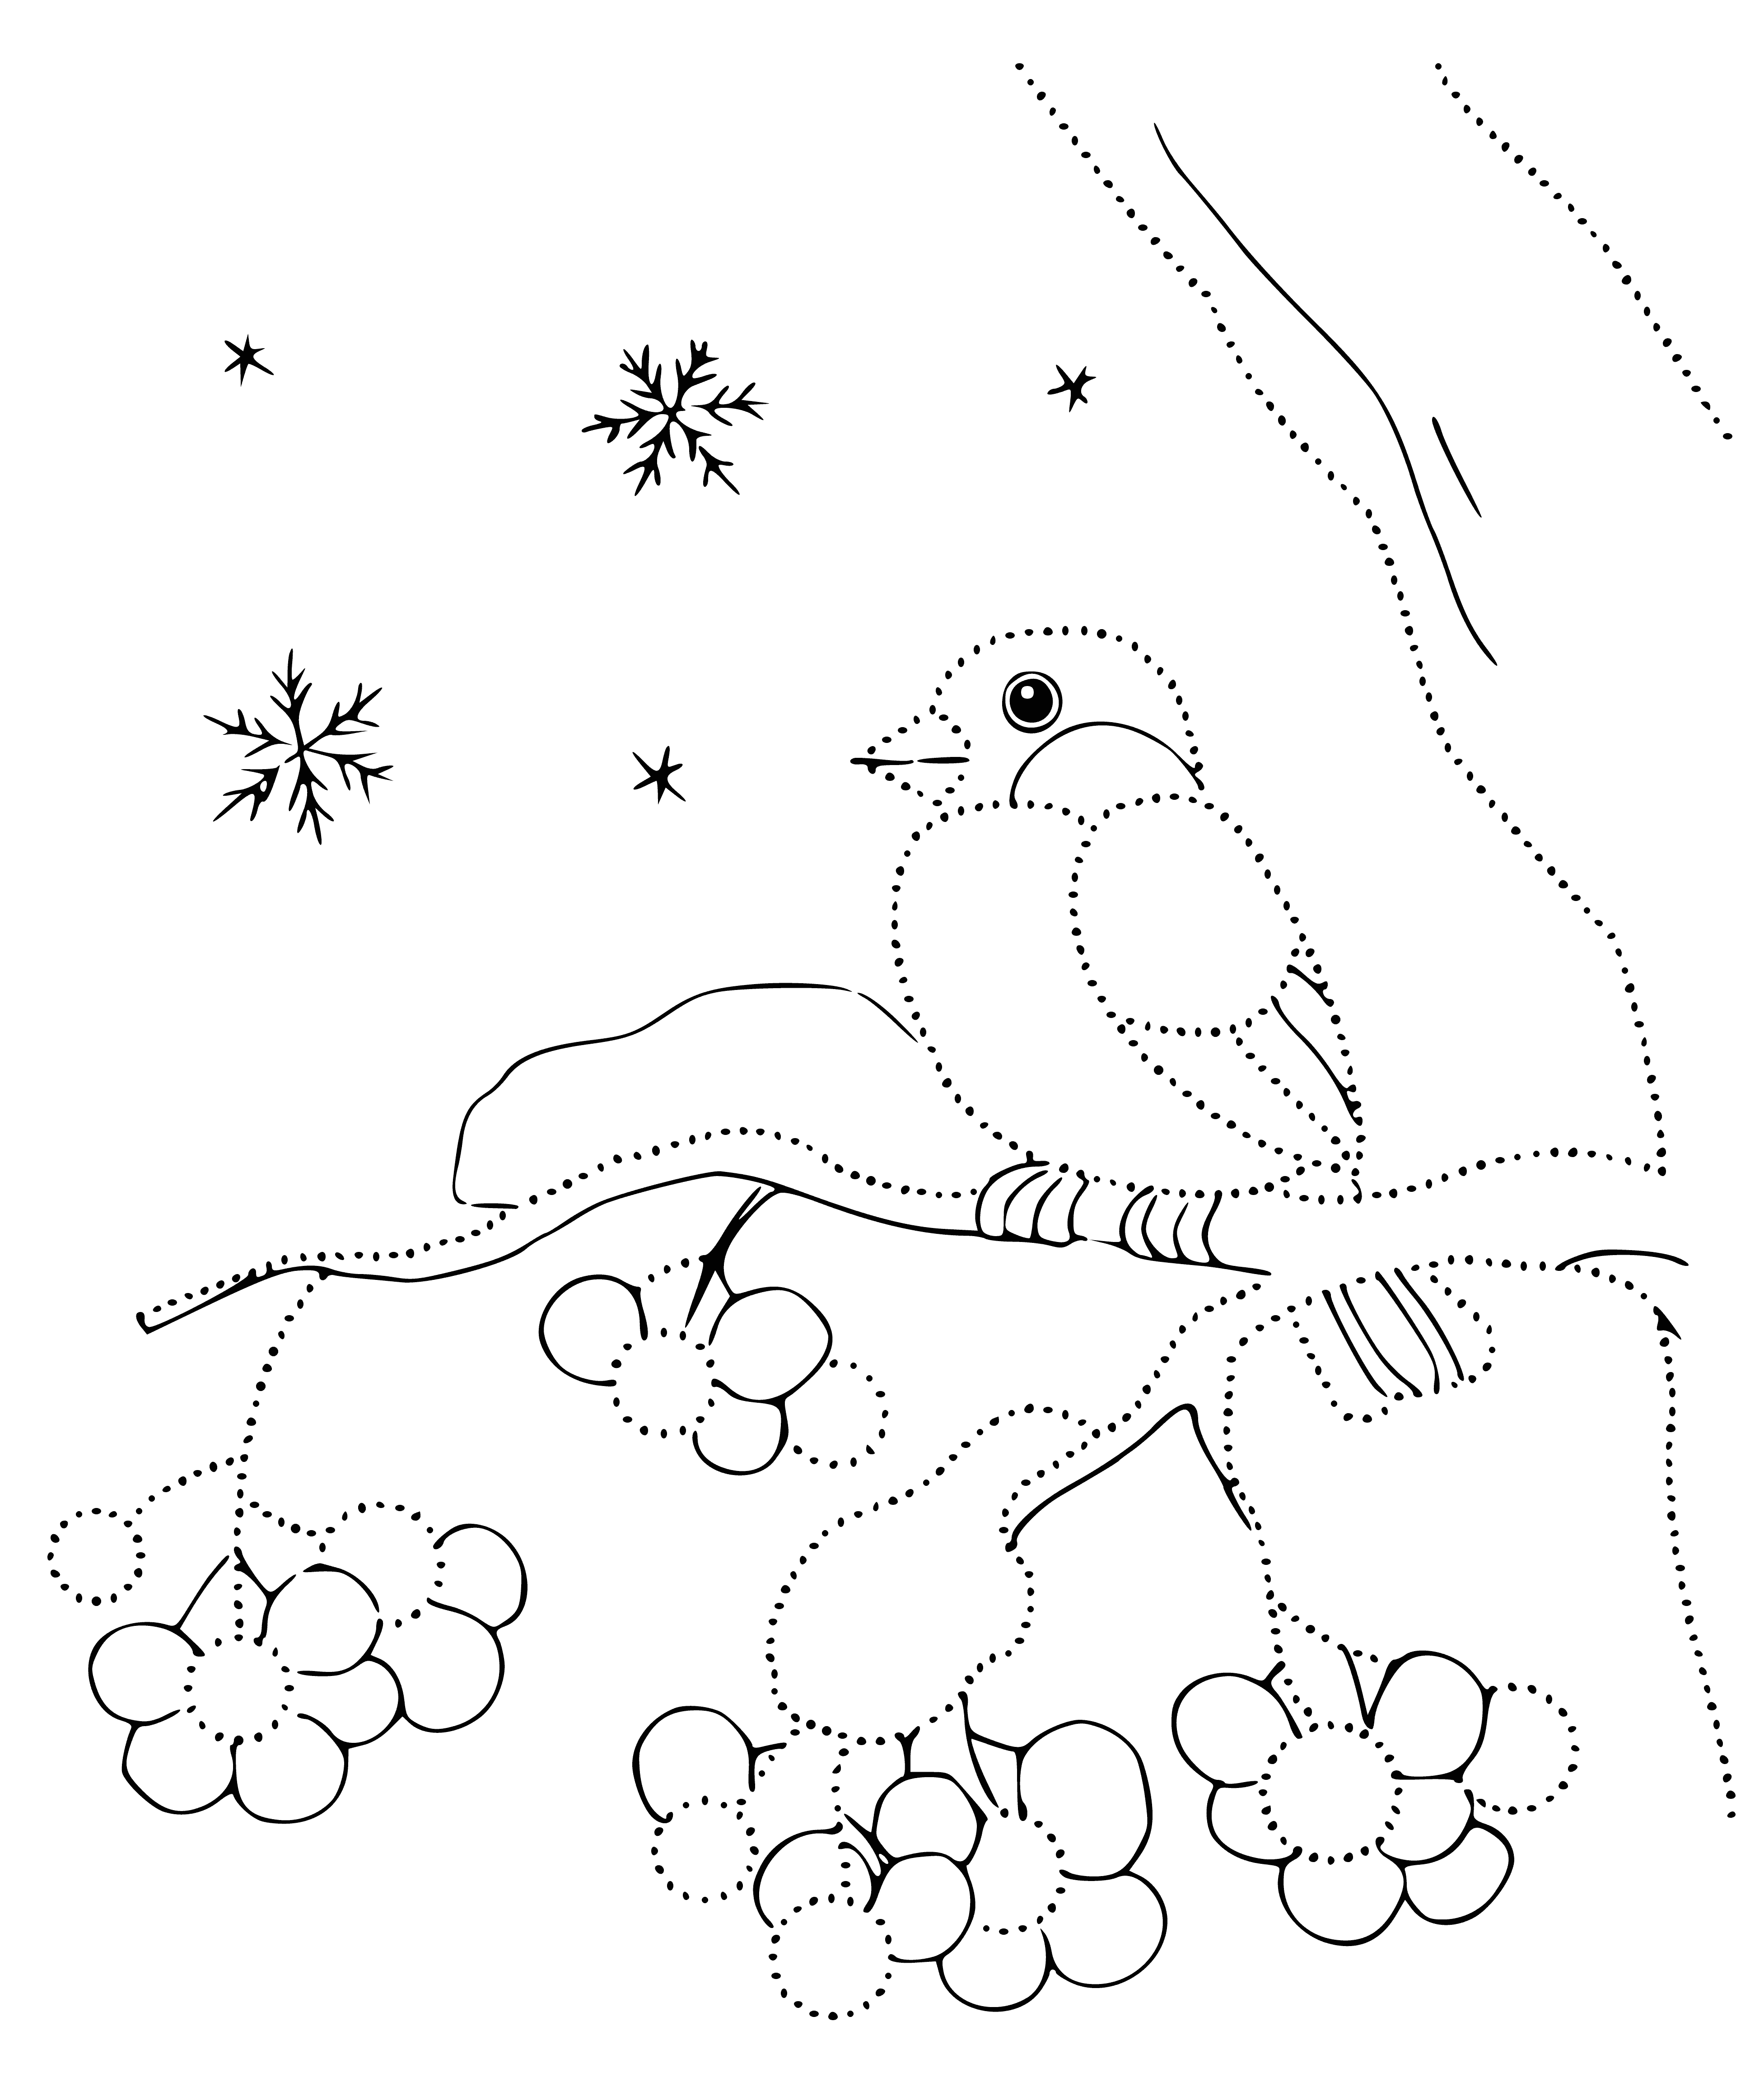 coloring page: Small, plump bird on thin, dead branch. Black head, white cheeks, small black beak. Snow-covered forest in background.